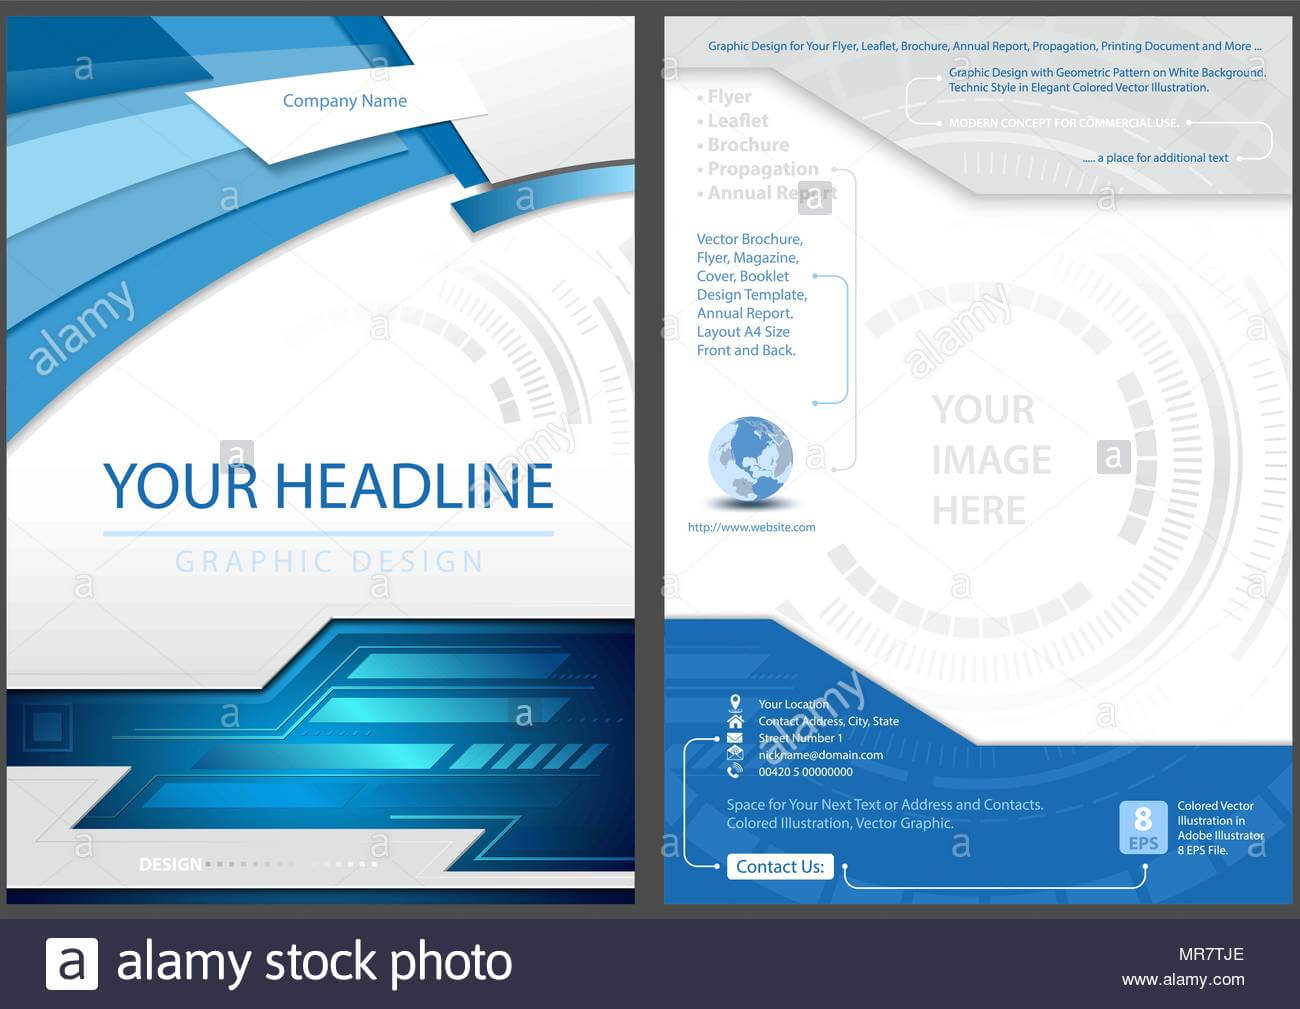 Flyer Template In Blue Tech Style Stock Vector Art Pertaining To Adobe Illustrator Flyer Template